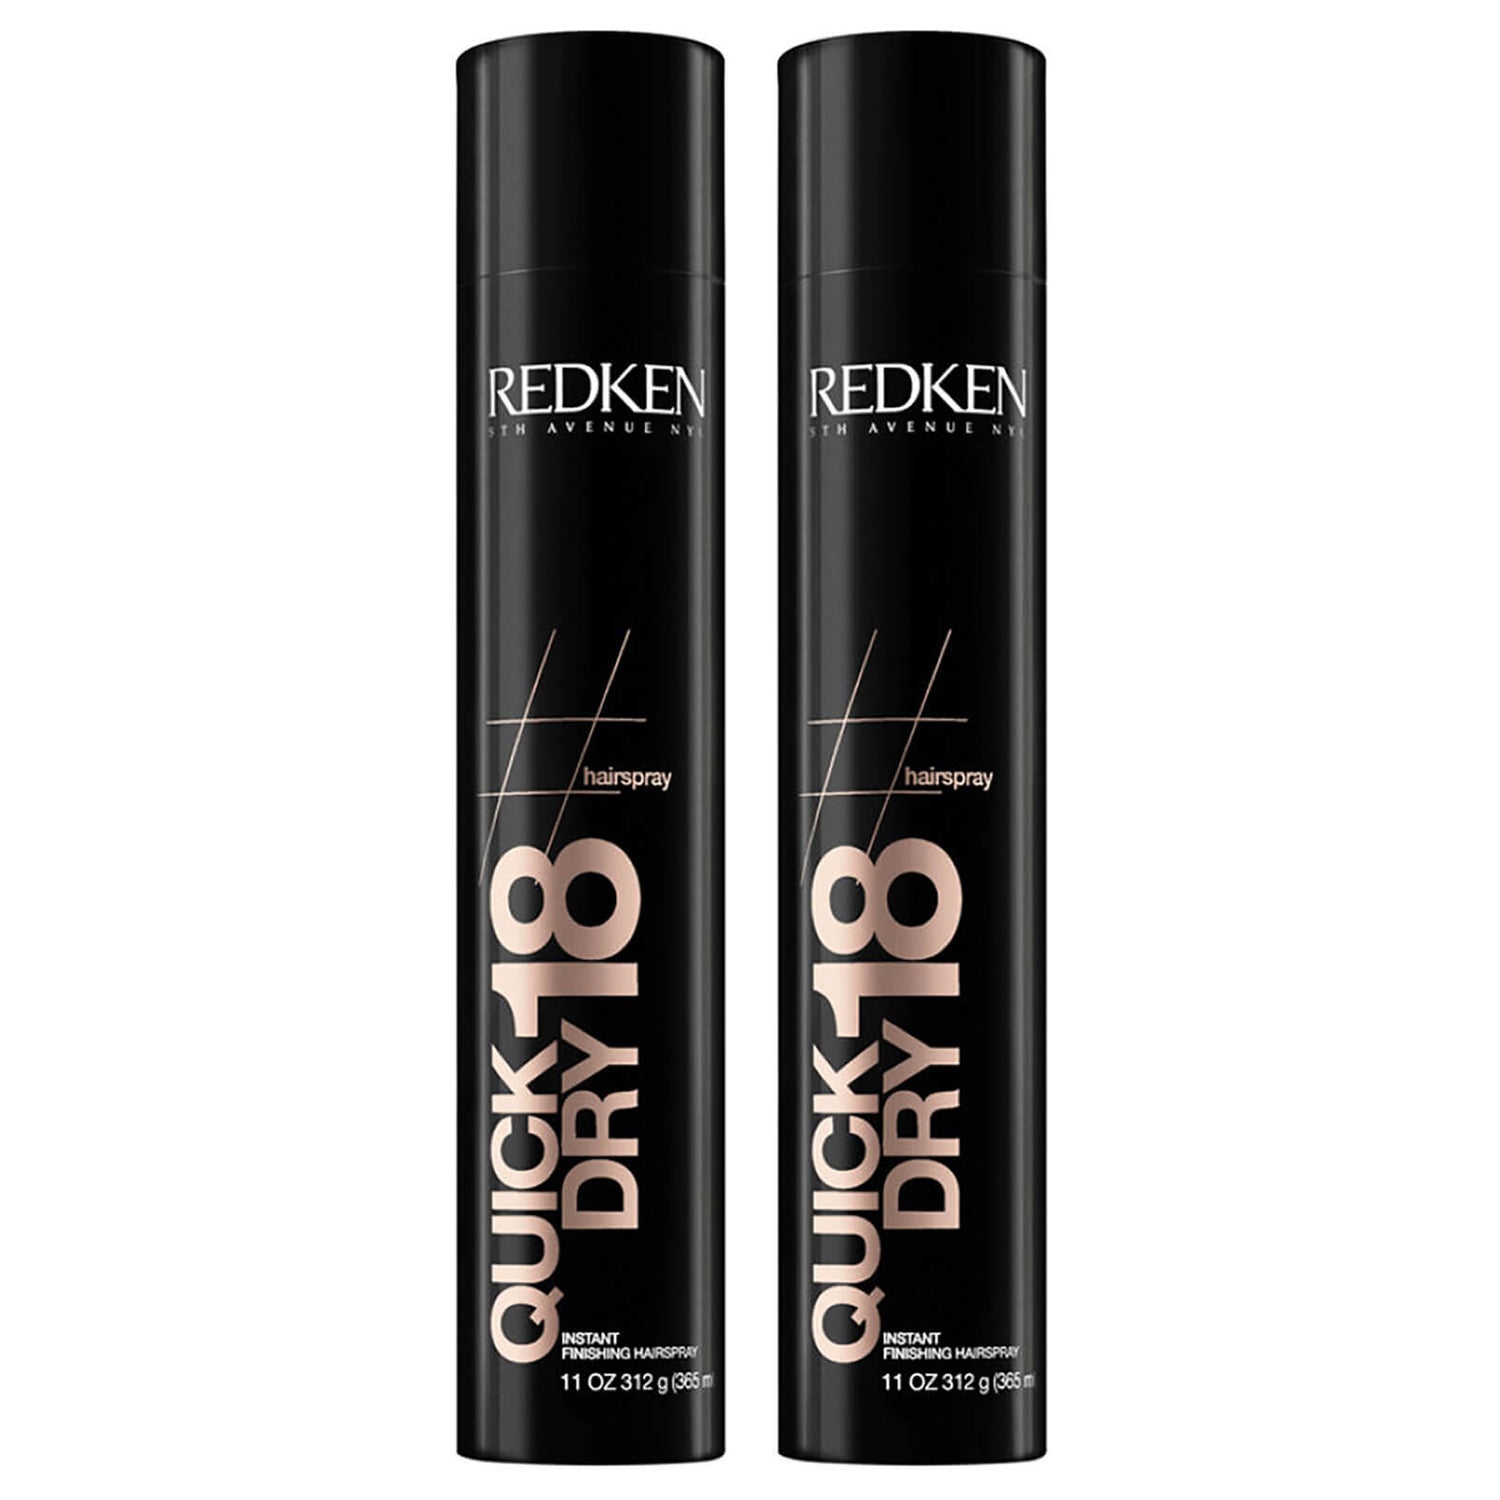 Redken Quick Dry 18 Instant Finishing Hairspray Duo